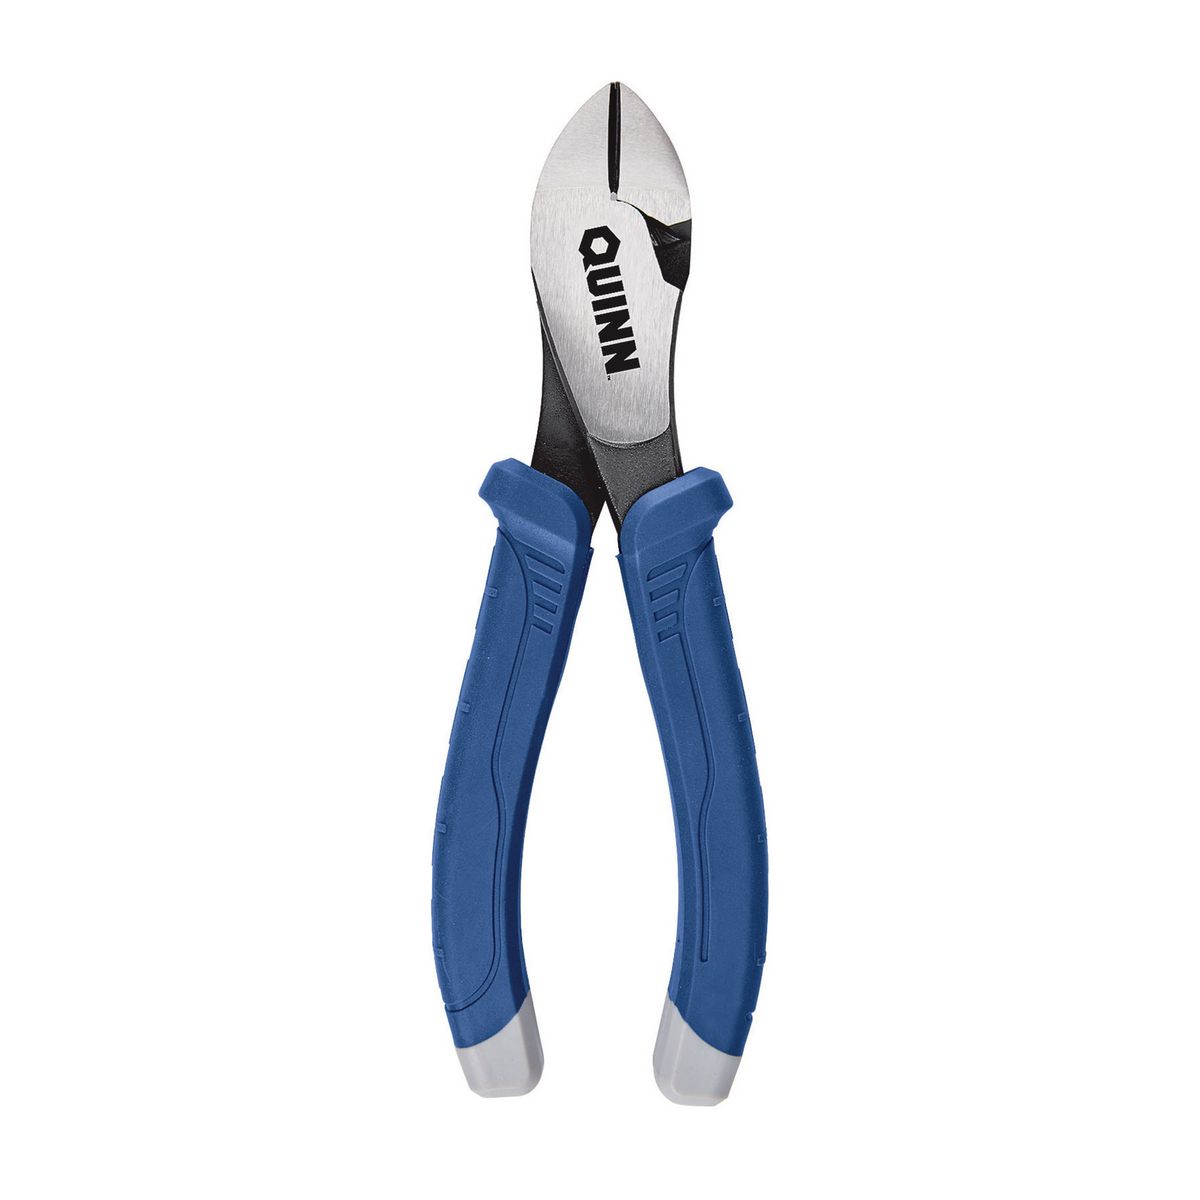 QUINN 7 in. Diagonal Cutters with Comfort Grip - Item 64105